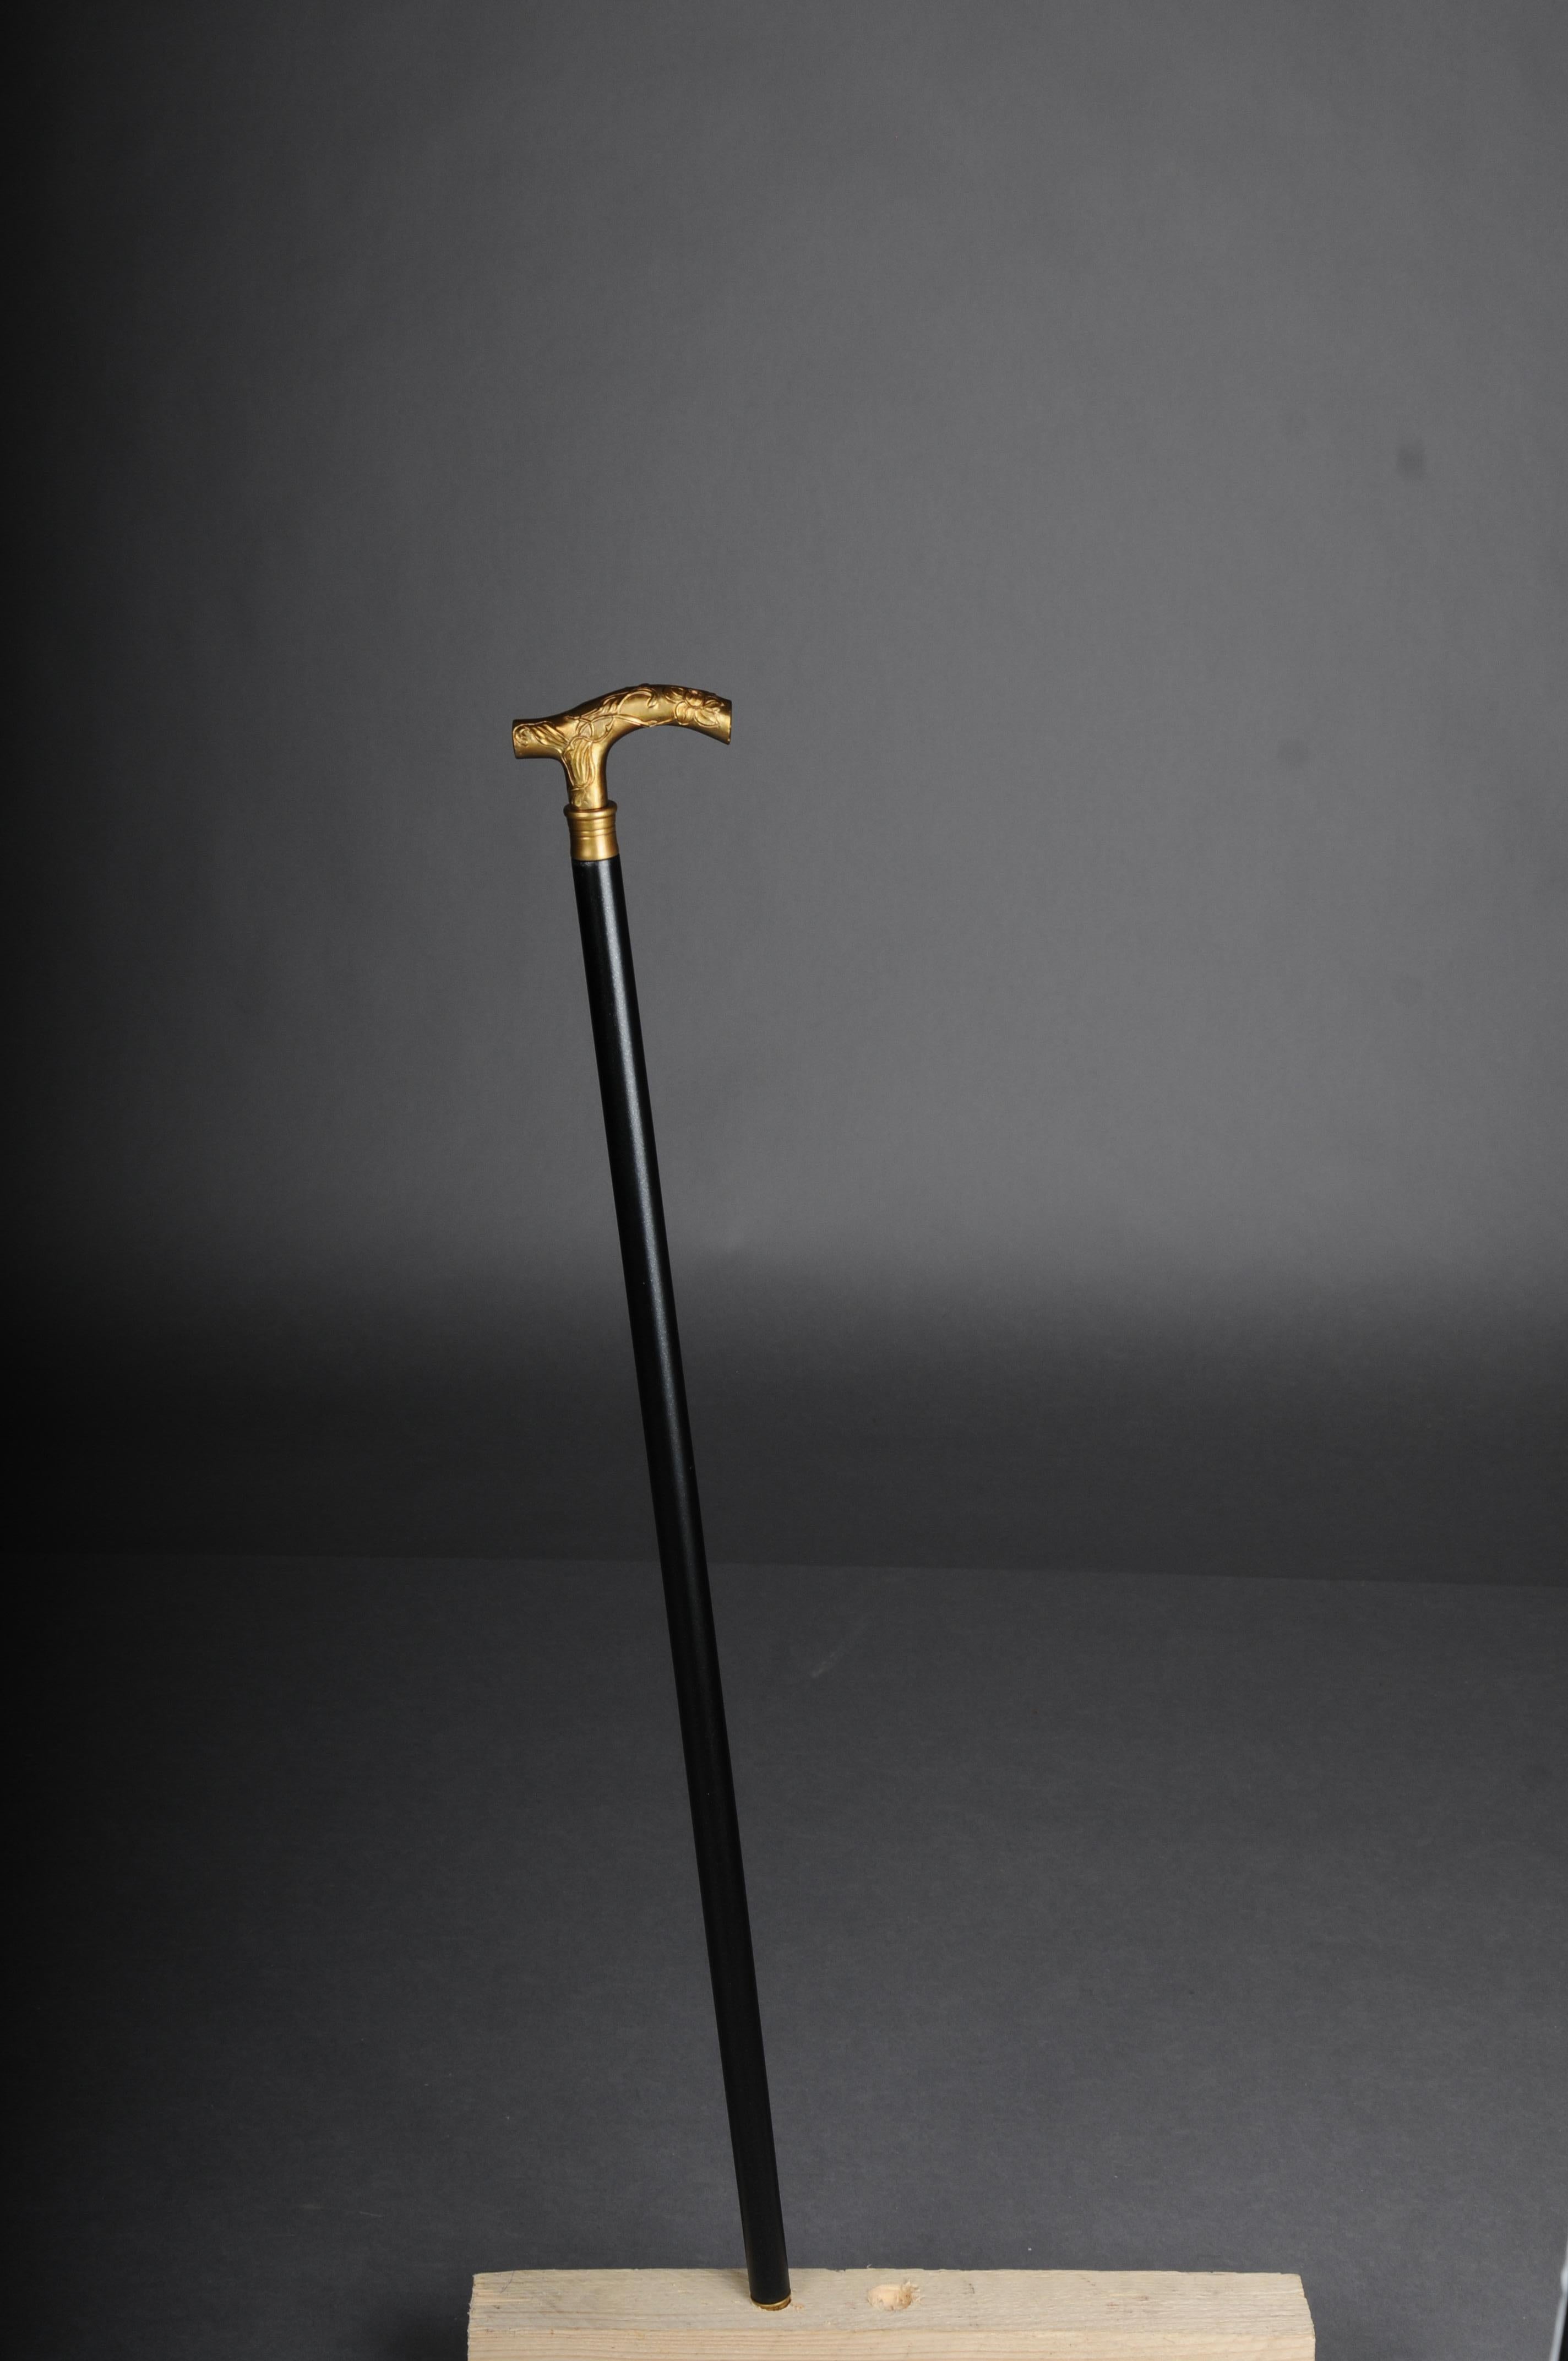 Beautiful, fine Art Nouveau walking stick bronze, gold type 2

High quality French walking stick made of high quality handle with bronze fitting.

Solid ebonized beech wood. Bronze fittings finely crafted with relief in a fantastically beautiful Art